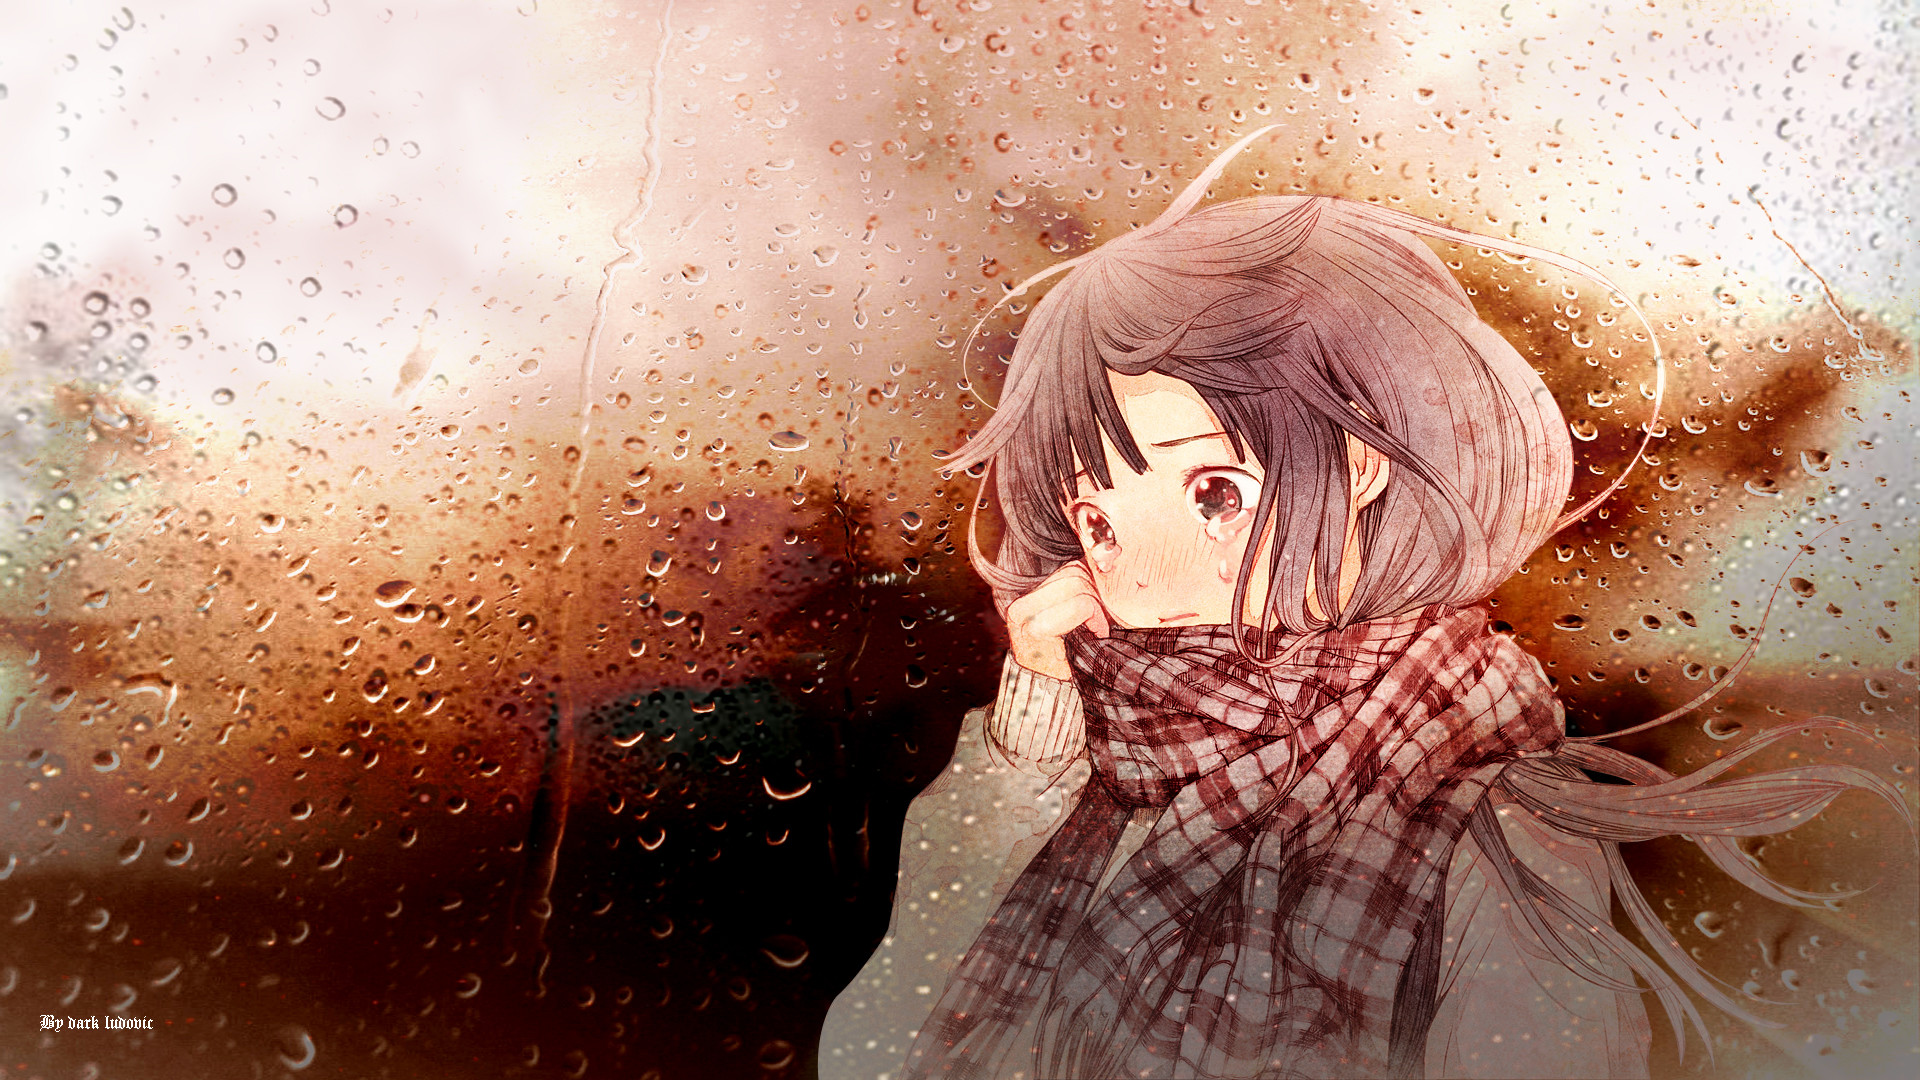 Sad Face Wallpaper By Darkludovic Sad Face Wallpaper - Anime Girl Looking At Ground - HD Wallpaper 